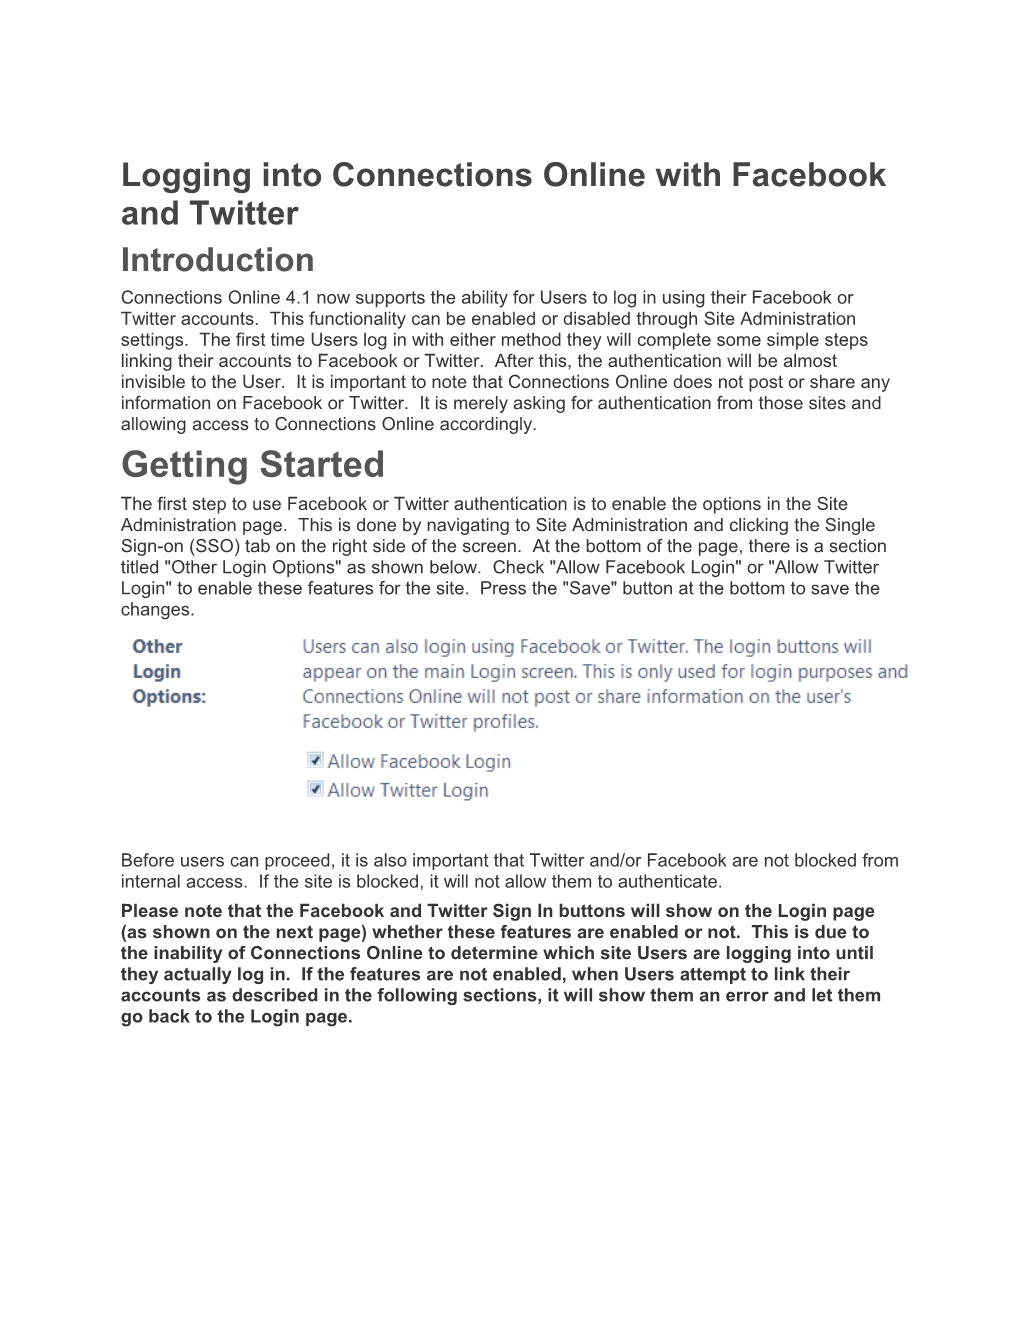 Logging Into Connections Online with Facebook and Twitter